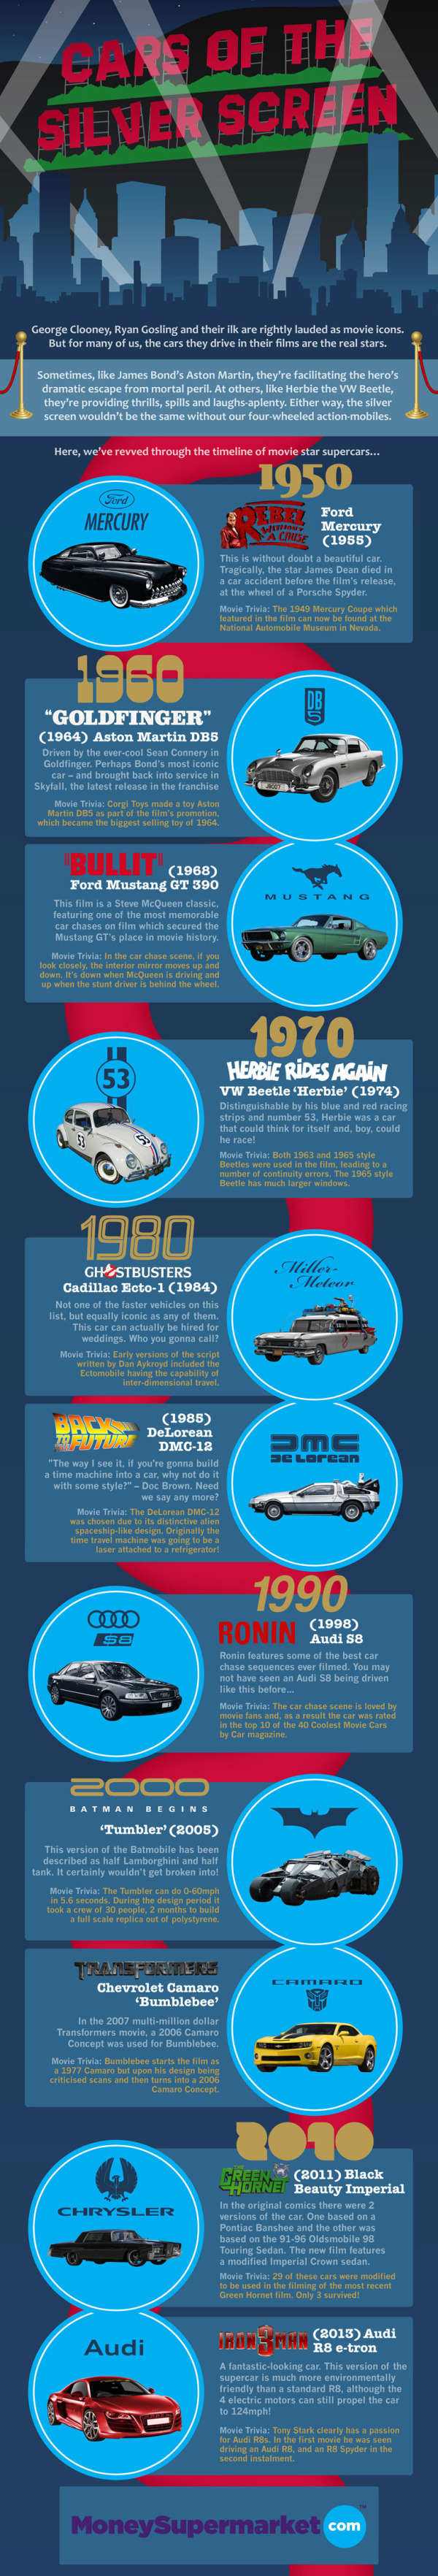 Cars of the Silver Screen infographic